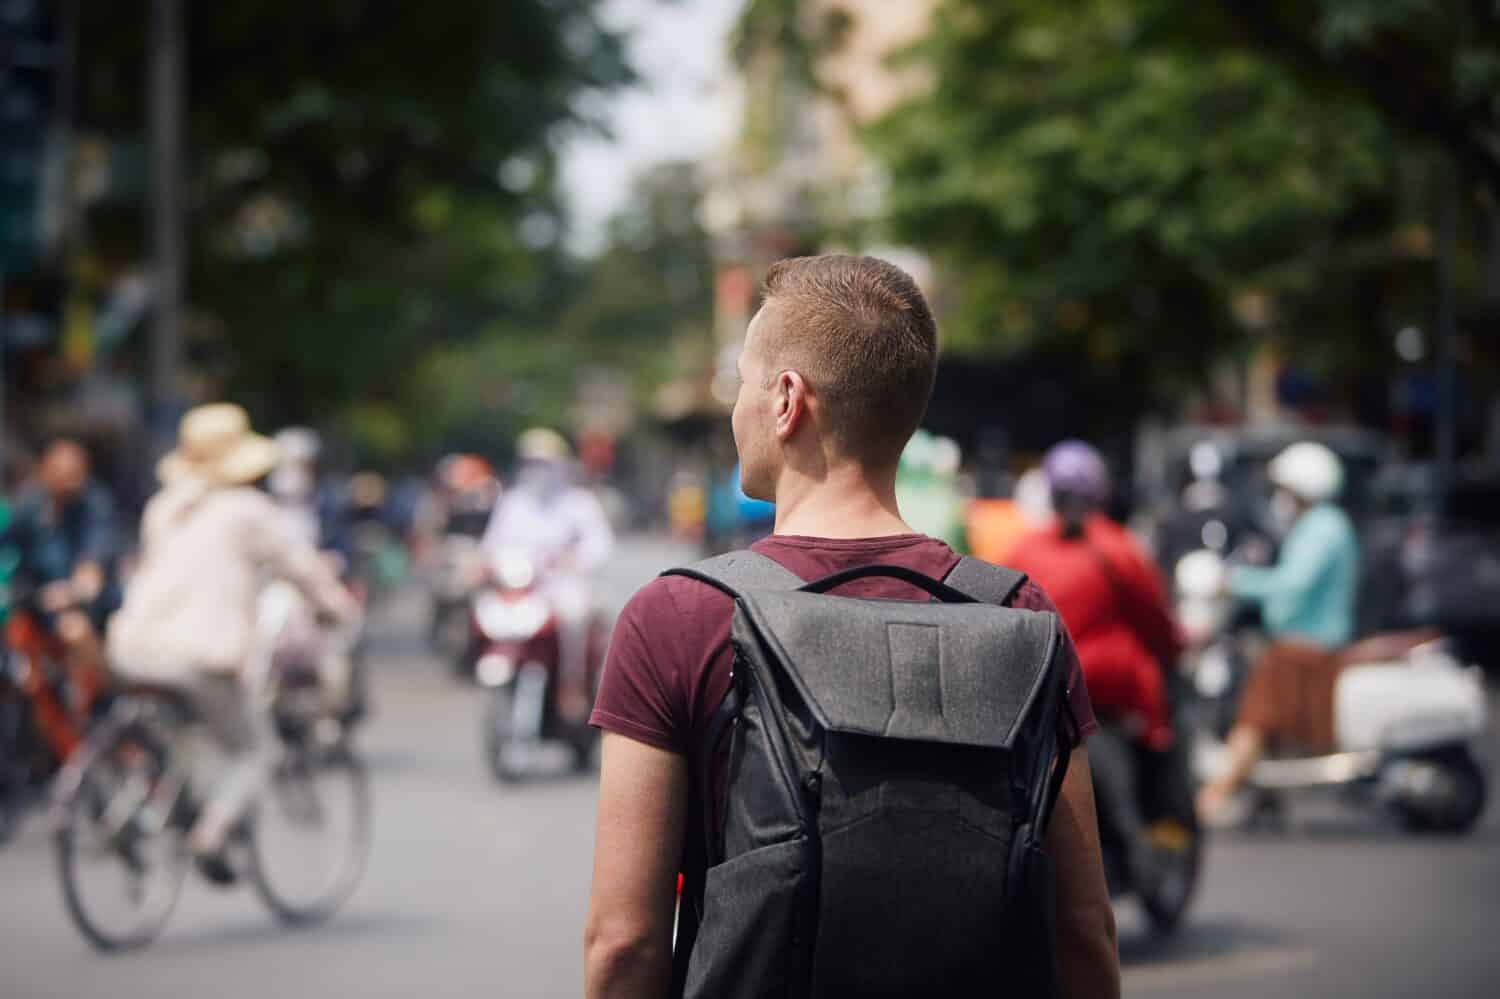 Traveler with backpack discovering Vietnam. Man in the middle of a busy street full of motorbikes and bicycles in Hanoi, Vietnam.